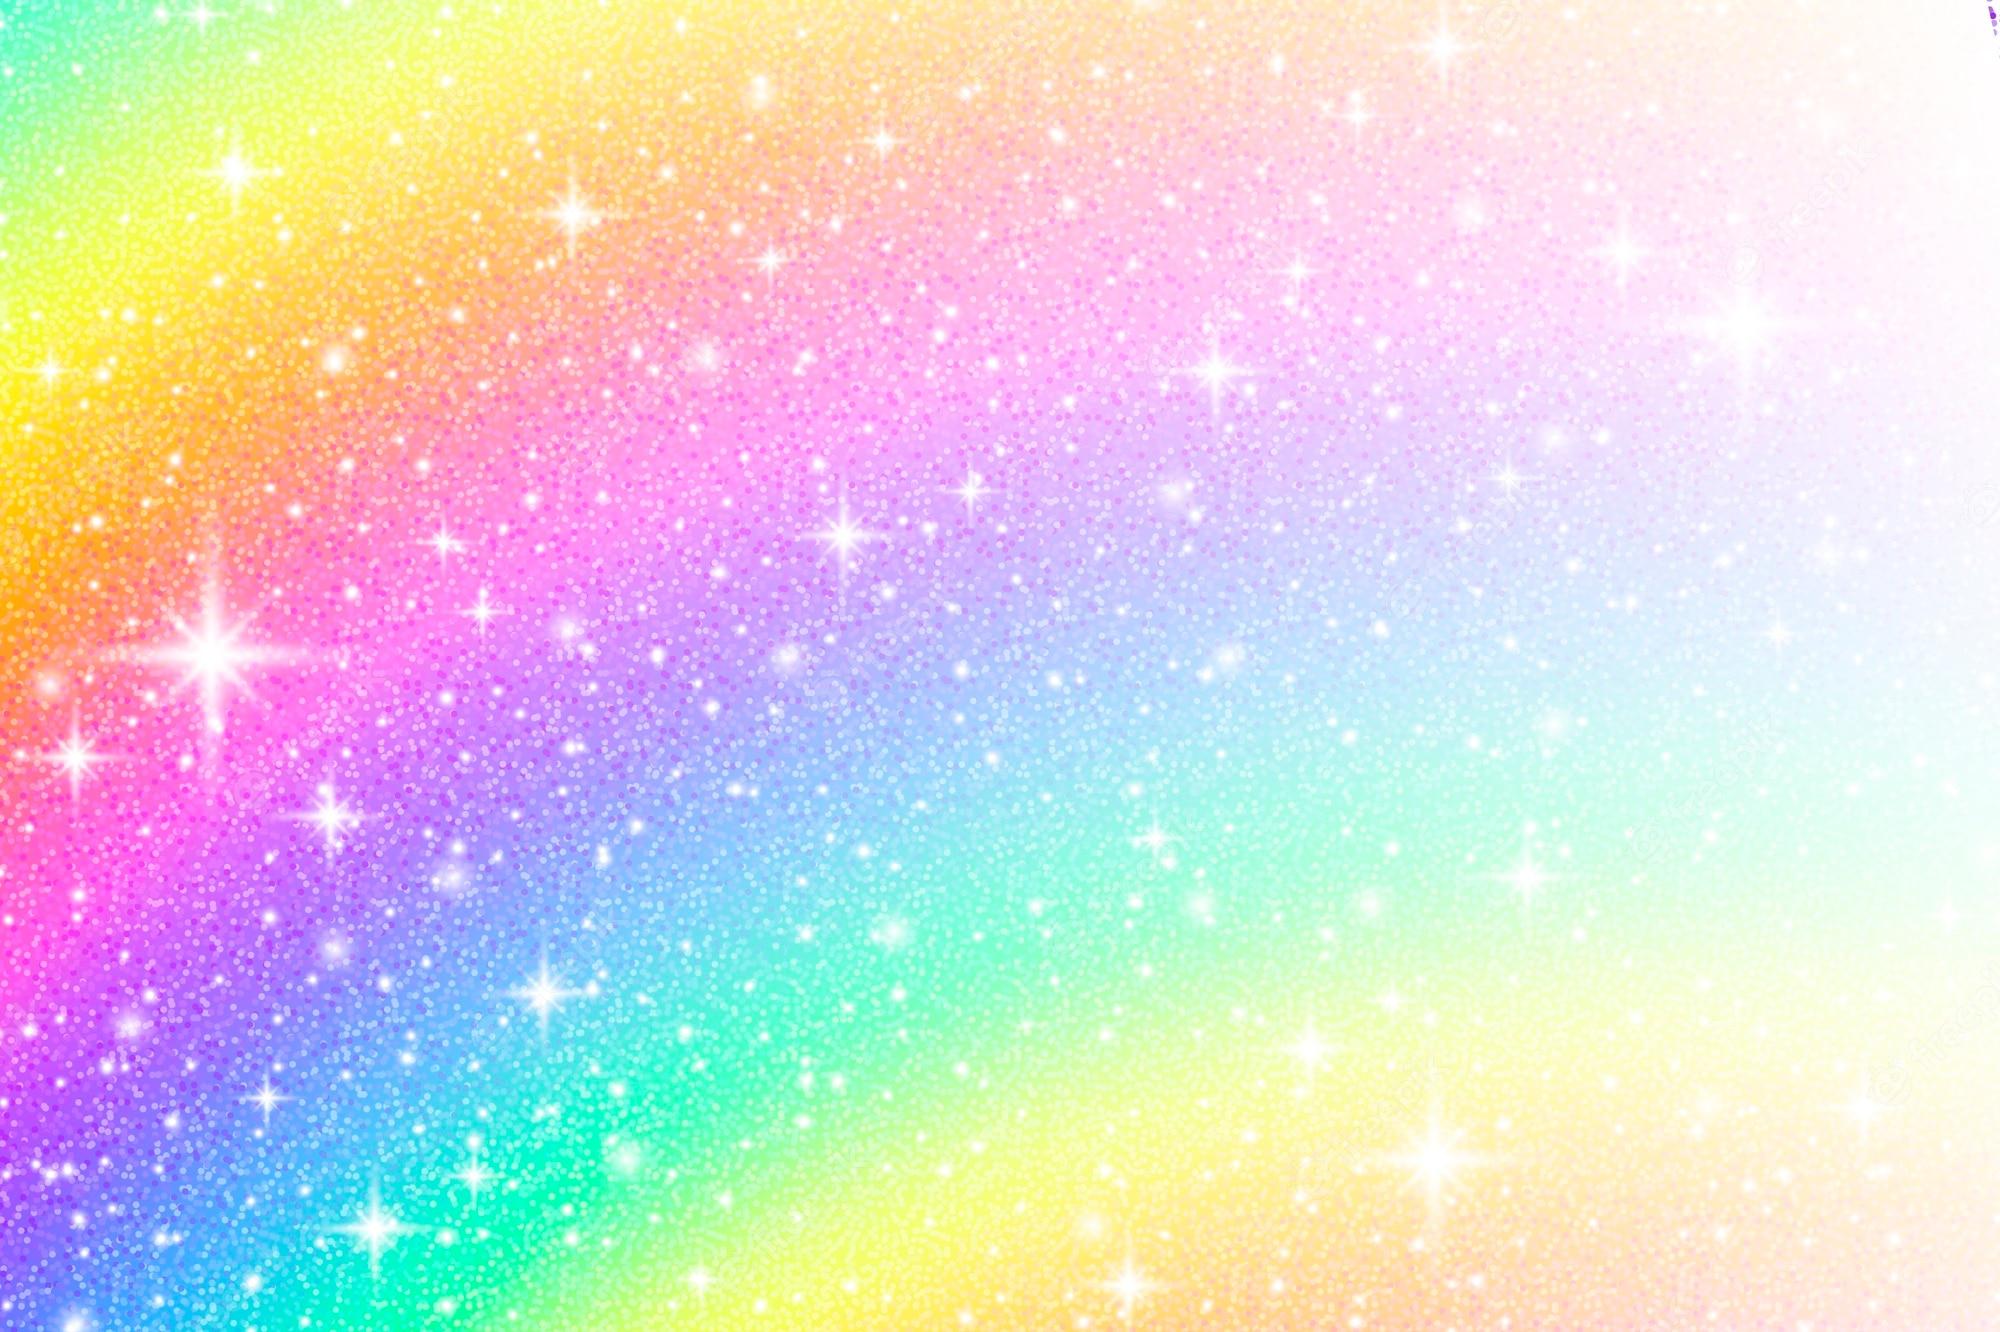 Free Download Free Download Colorful Glitter Iphone Wallpaper Colors